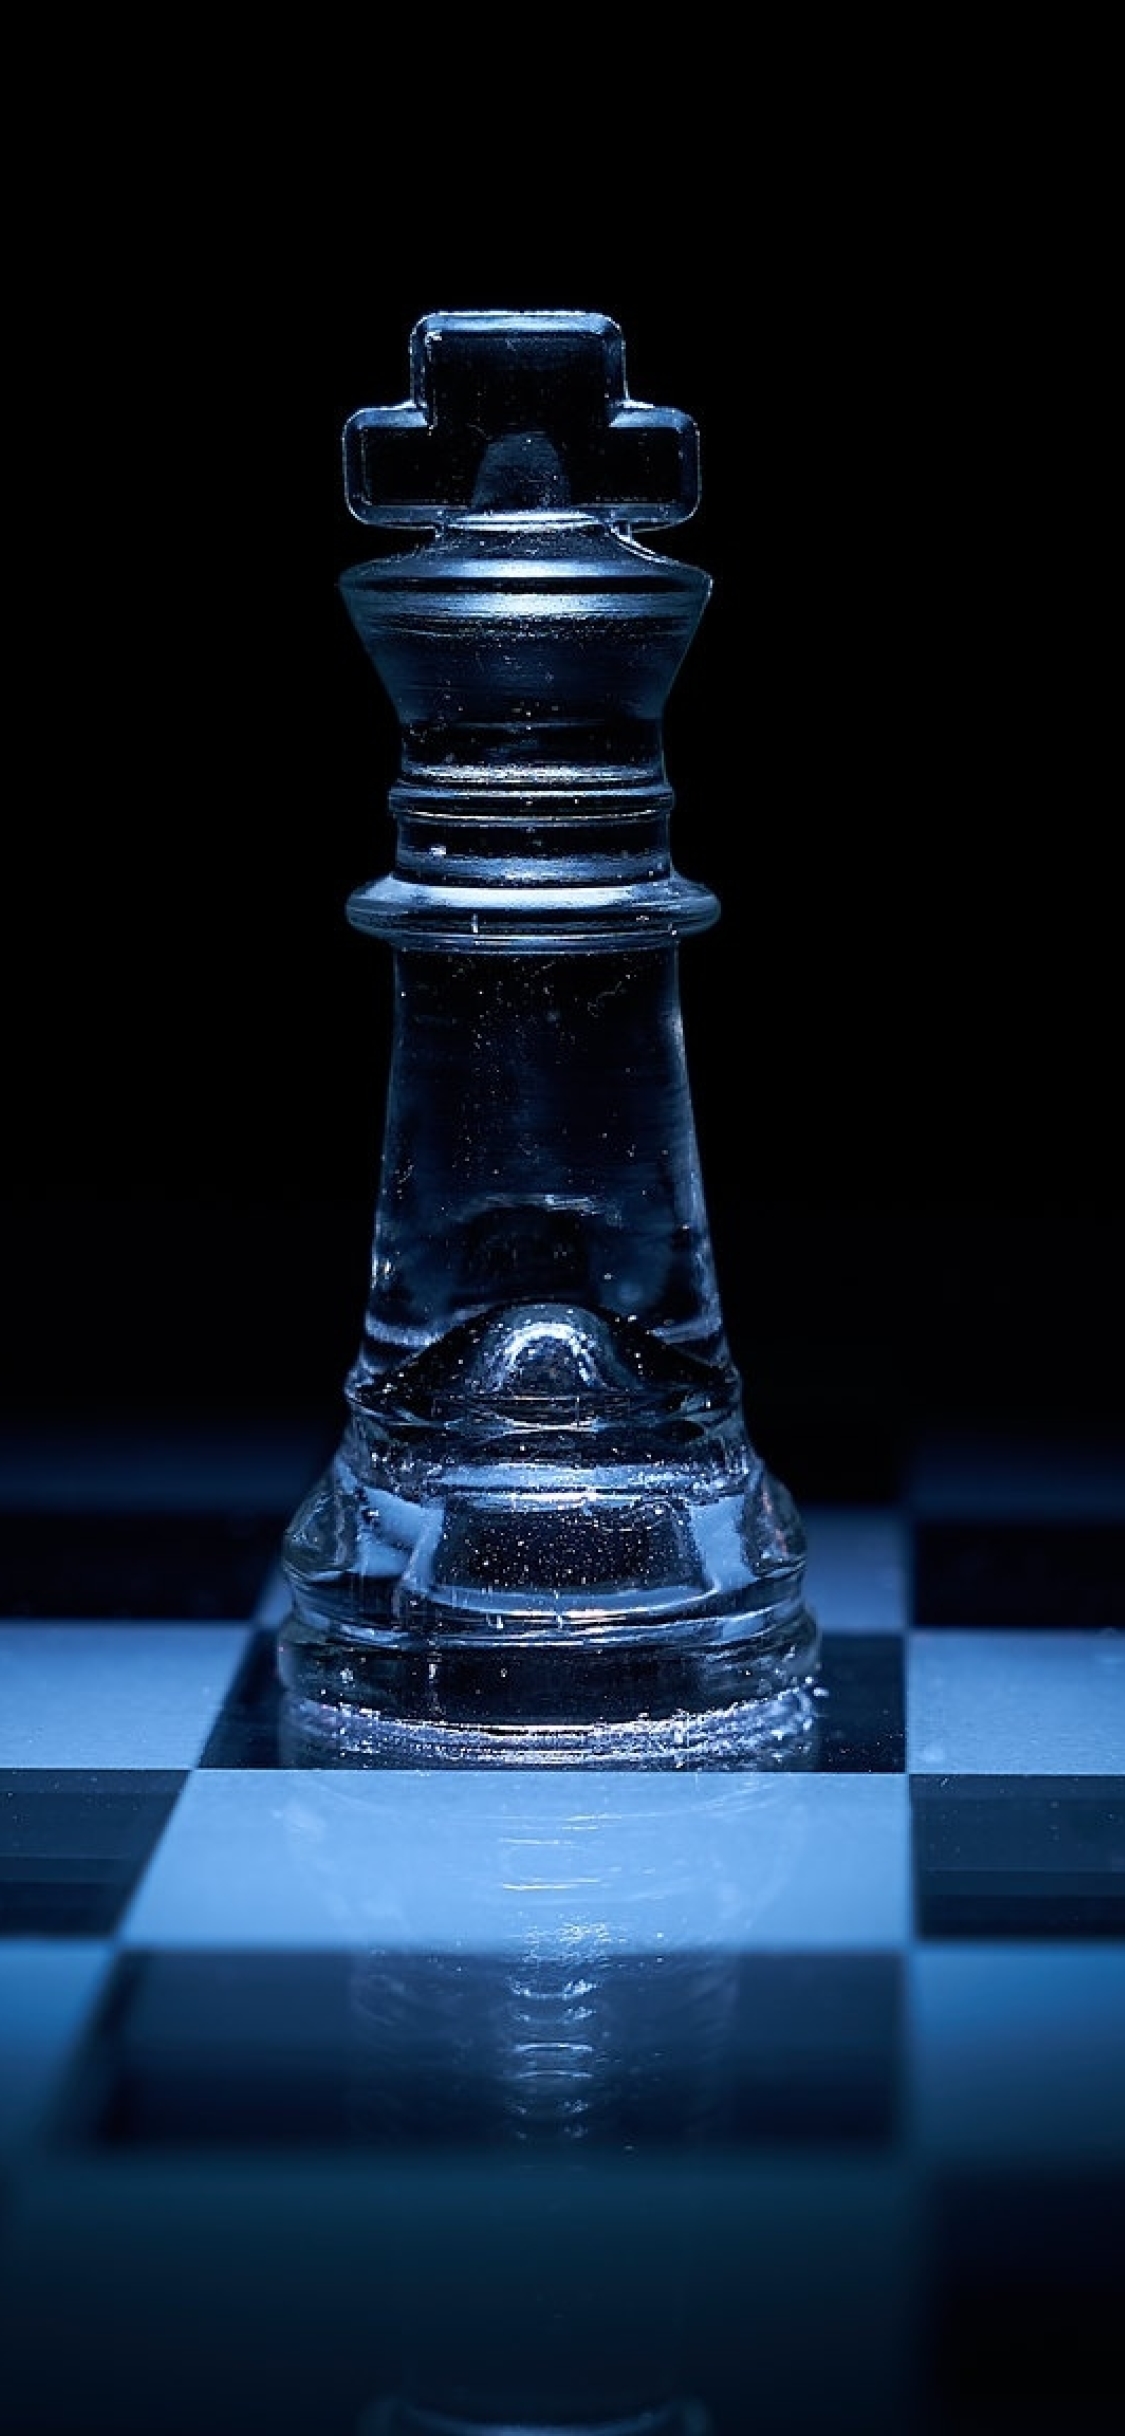 640x1136 Another Game Of Chess Iphone 5 wallpaper